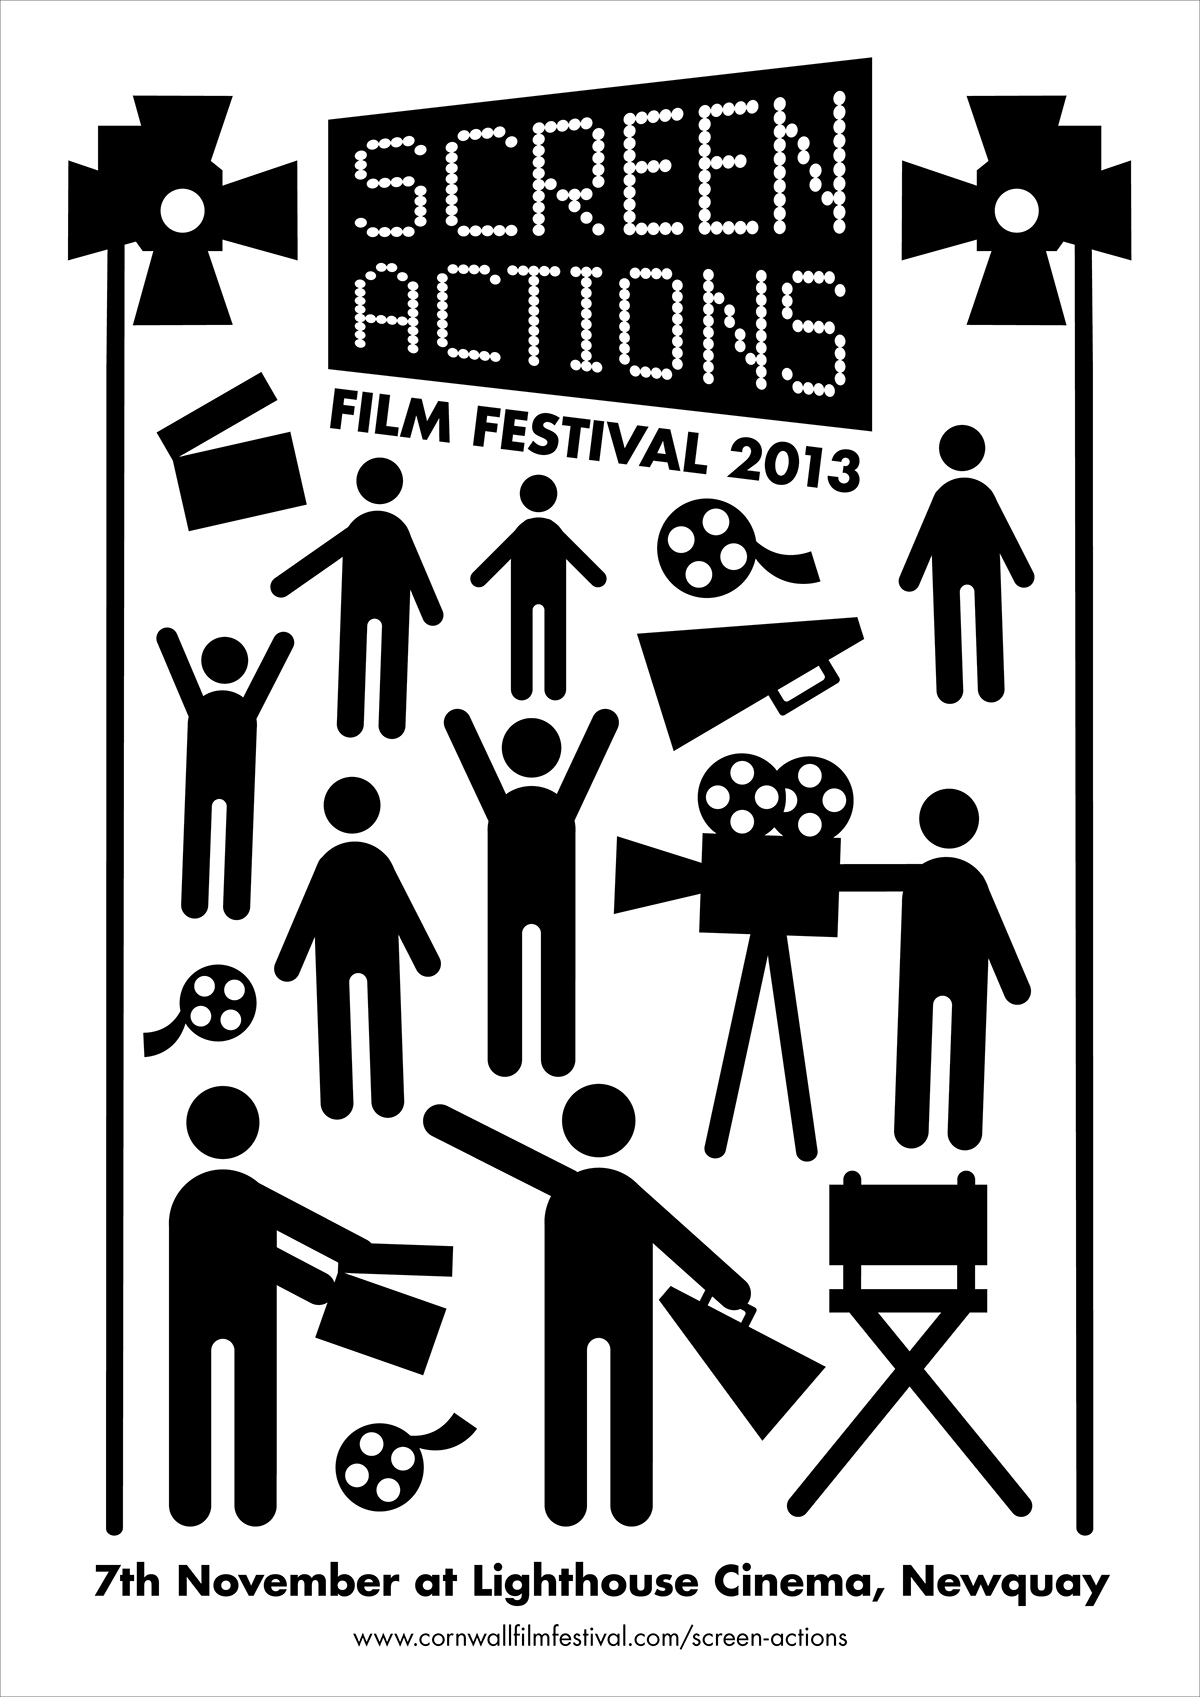 cornwall screen actions cornwall film festival movie young person school college festival Day poster Cinema workshops